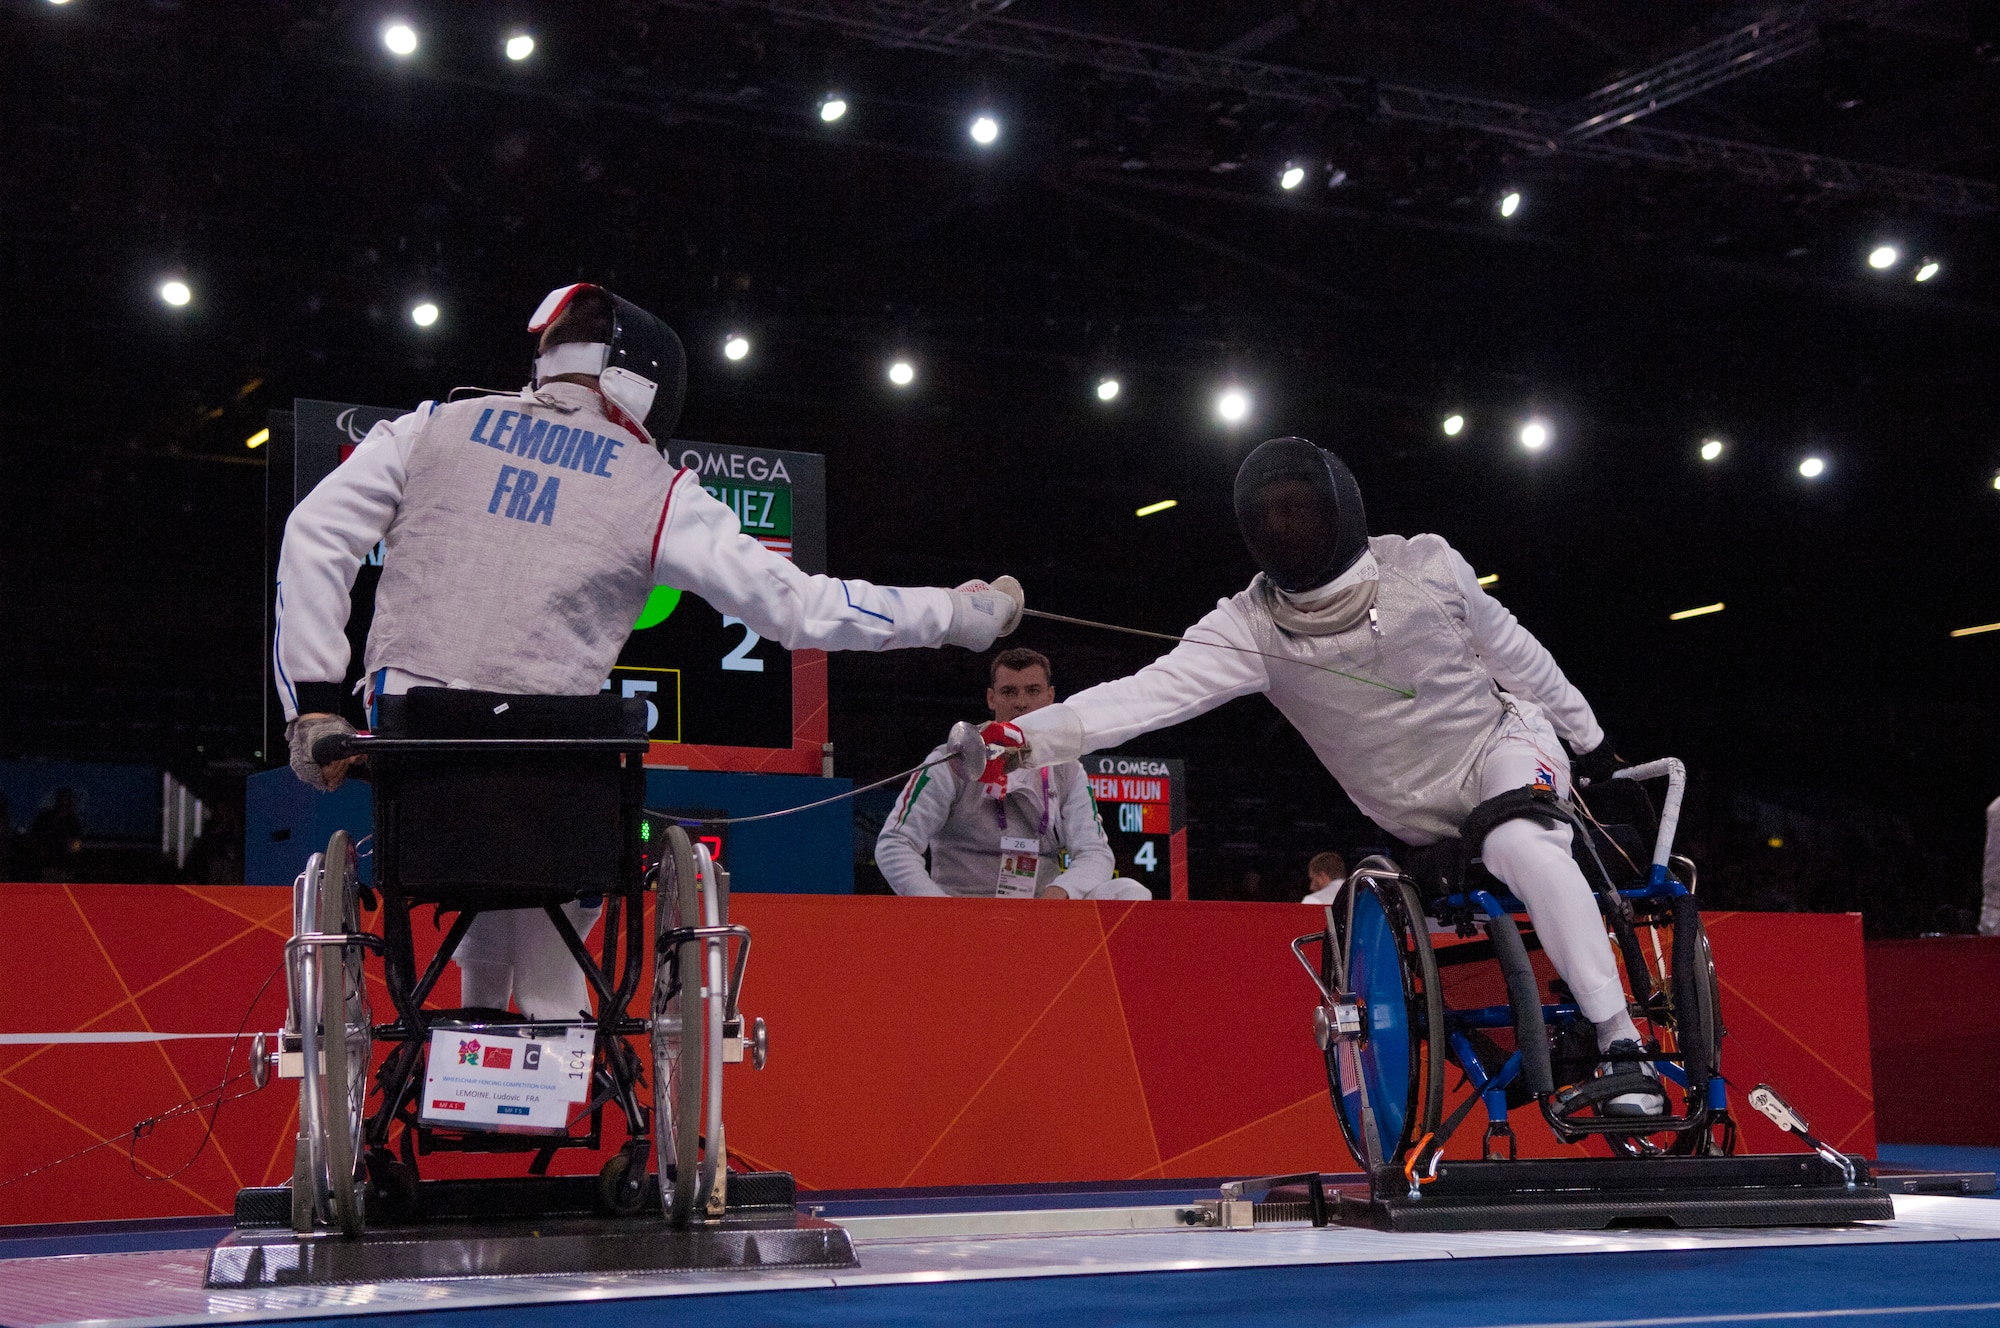 Former Air Force Staff Sgt. Mario Rodriguez, right, a member of the 2012 U.S. Paralympic fencing team, engages France's Ludov LeMoine during a bout at London's ExCel Centre during the Paralympic Games, Sept. 4, 2012. (DOD photo/Sgt. 1st Class Tyrone C. Marshall Jr.)  
